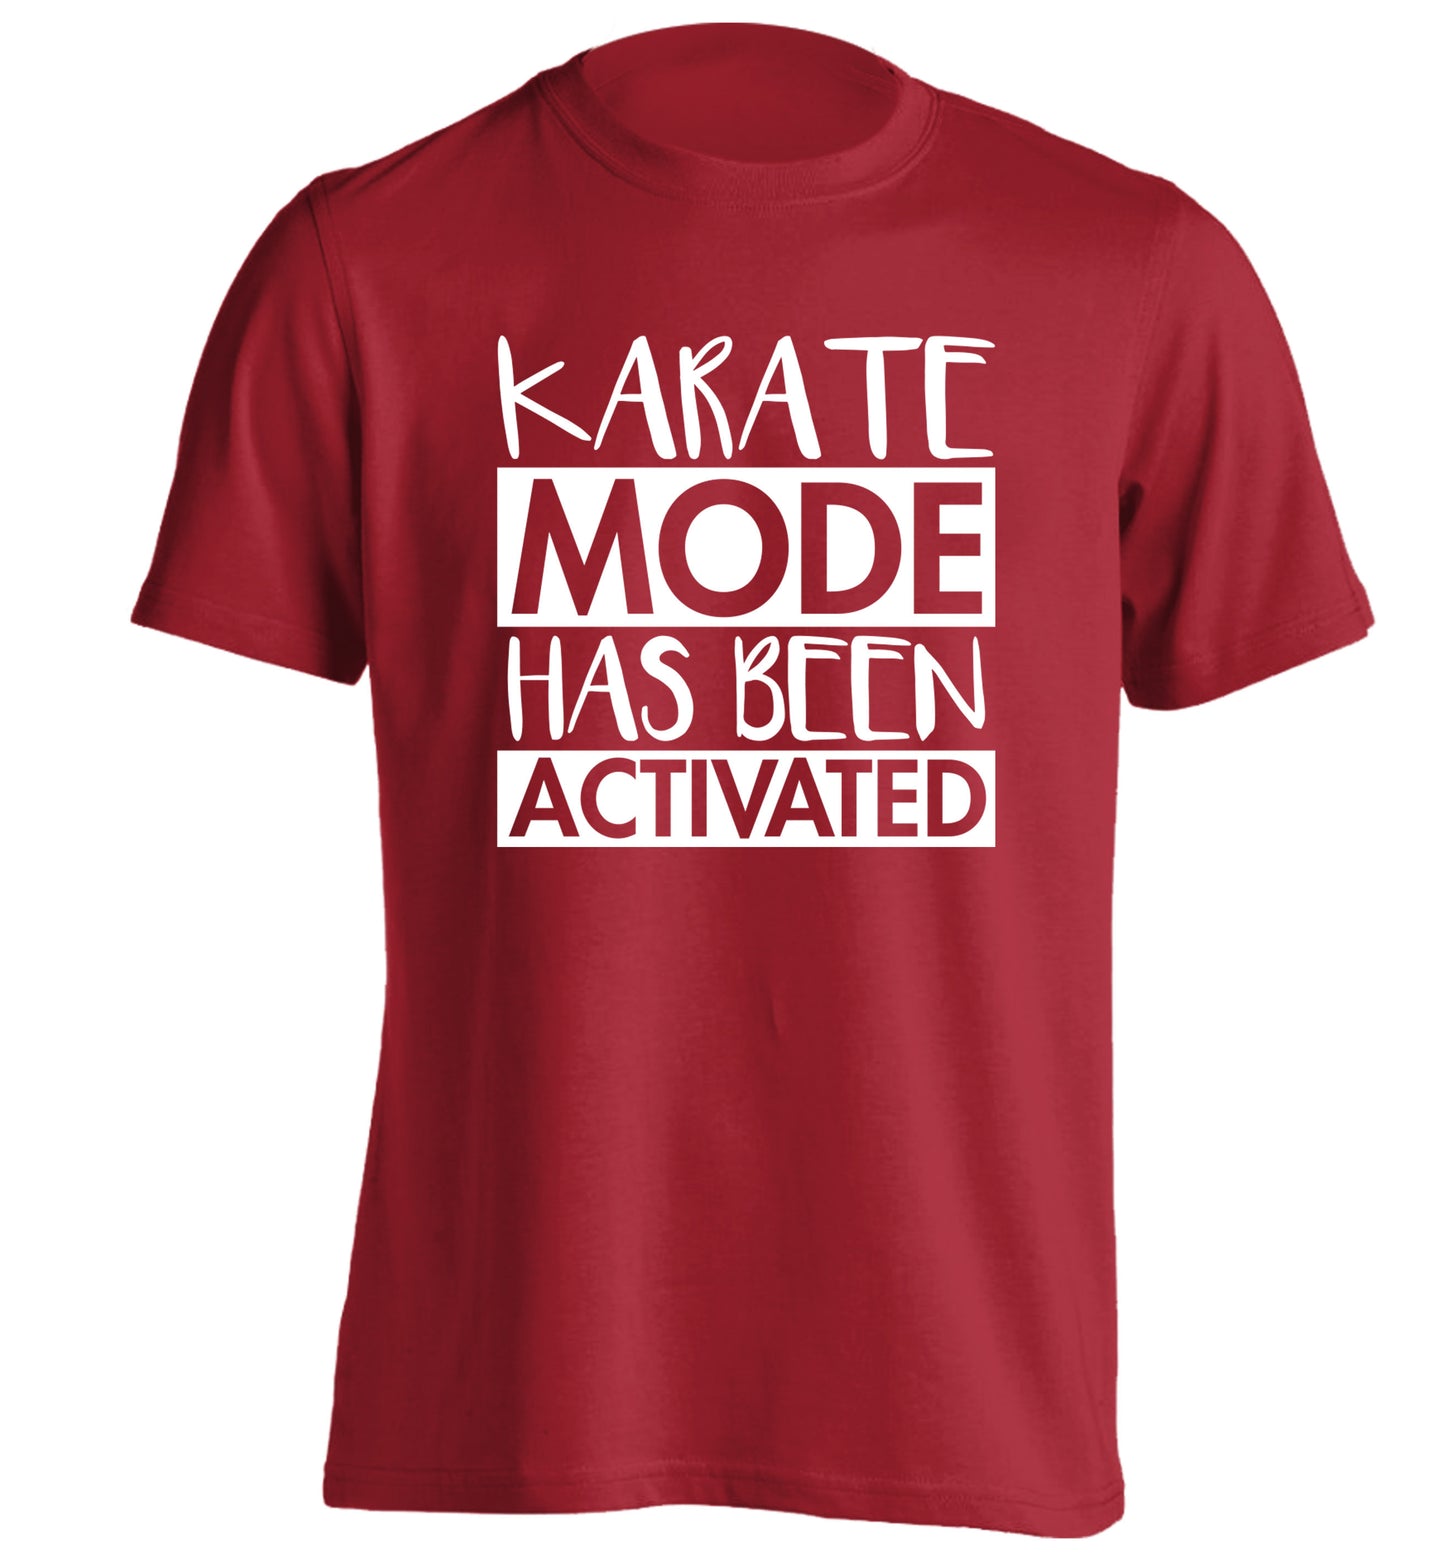 Karate mode activated adults unisex red Tshirt 2XL